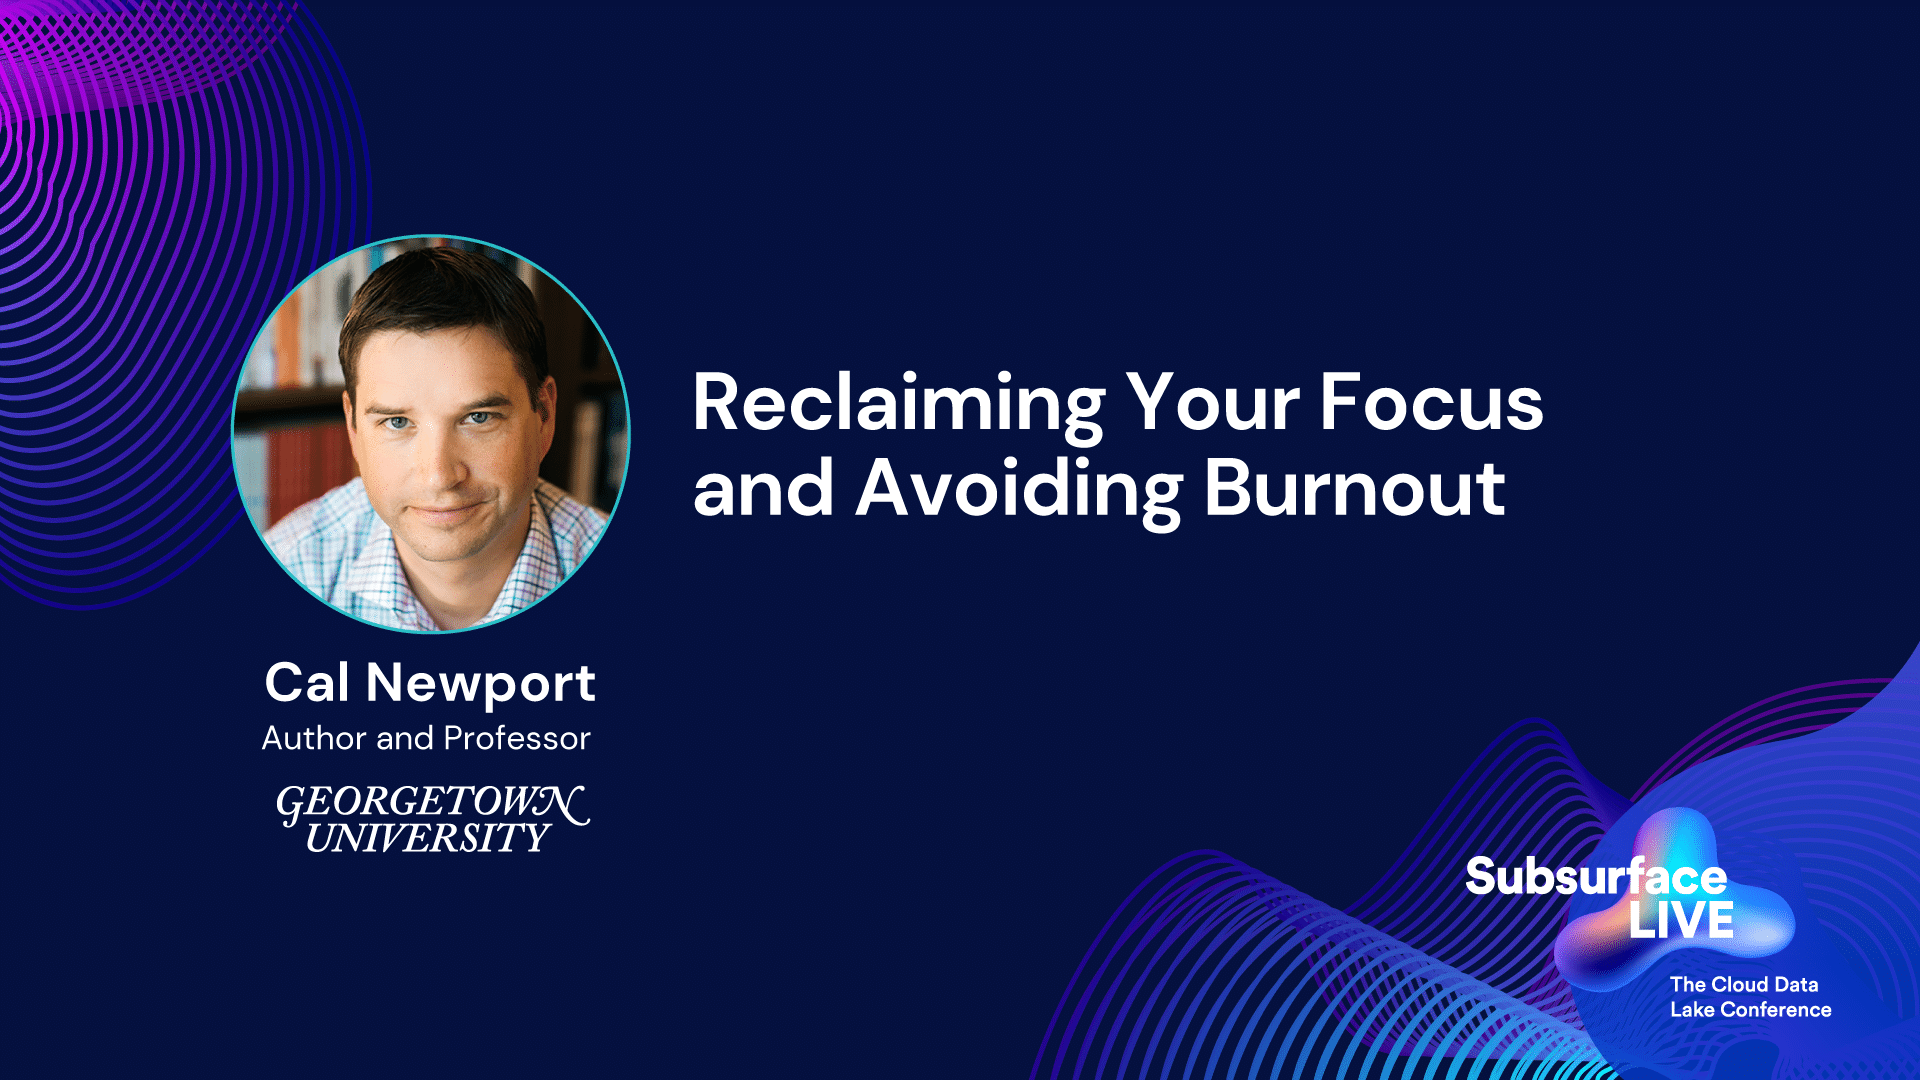 Reclaiming Your Focus and Avoiding Burnout